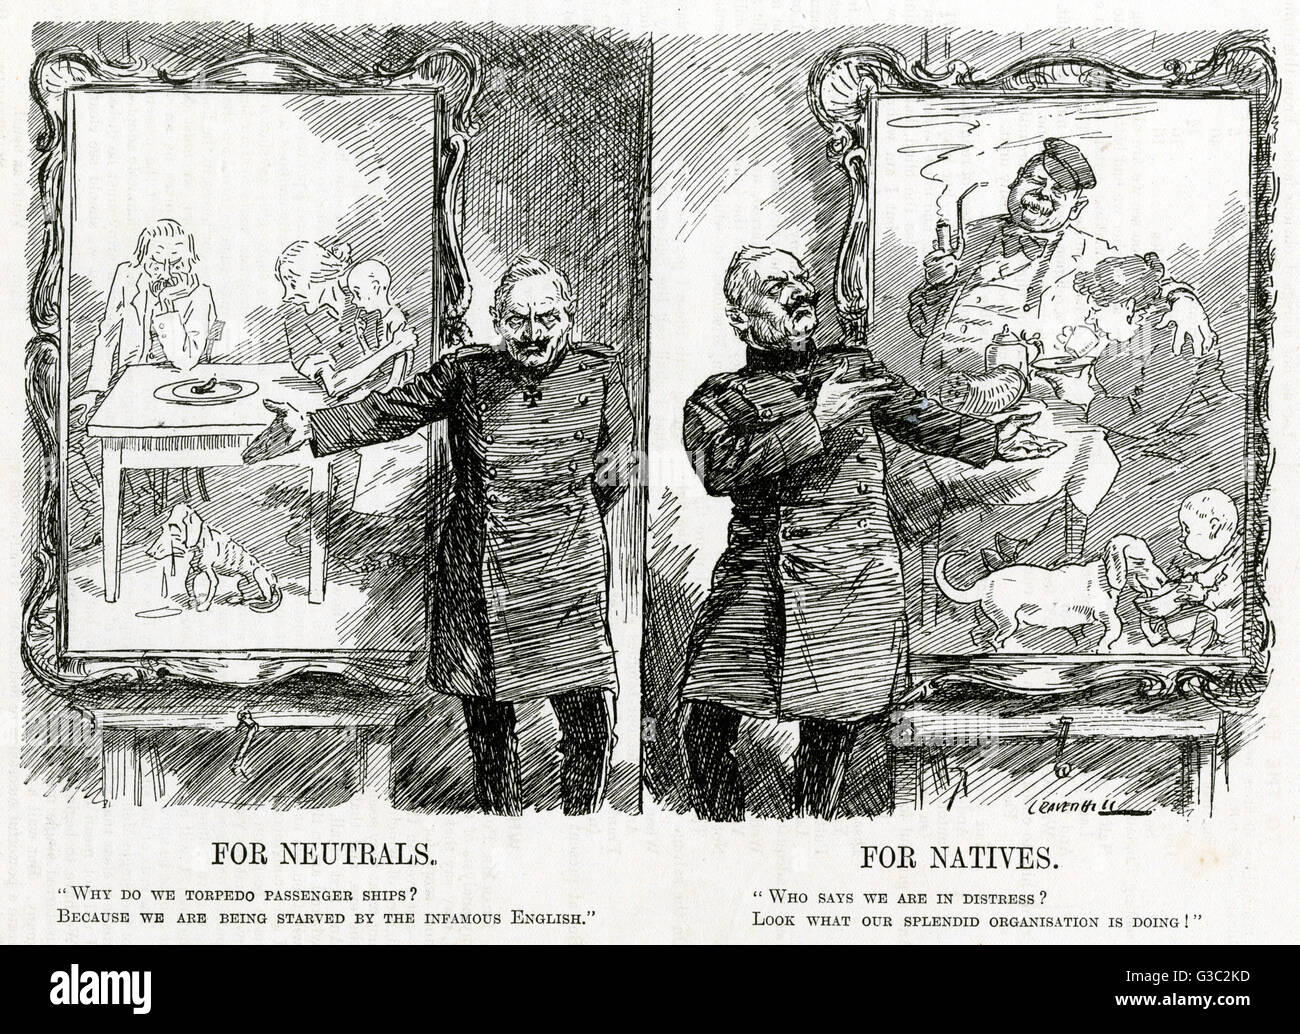 WW1 - Illustrating the two sides of German food supplies for 'Neutrals' and for 'Natives'. The image presents contrasting reflections of Germany's actions concerning food supplies. The images suggesting that food supplies were based on those who remain ne Stock Photo